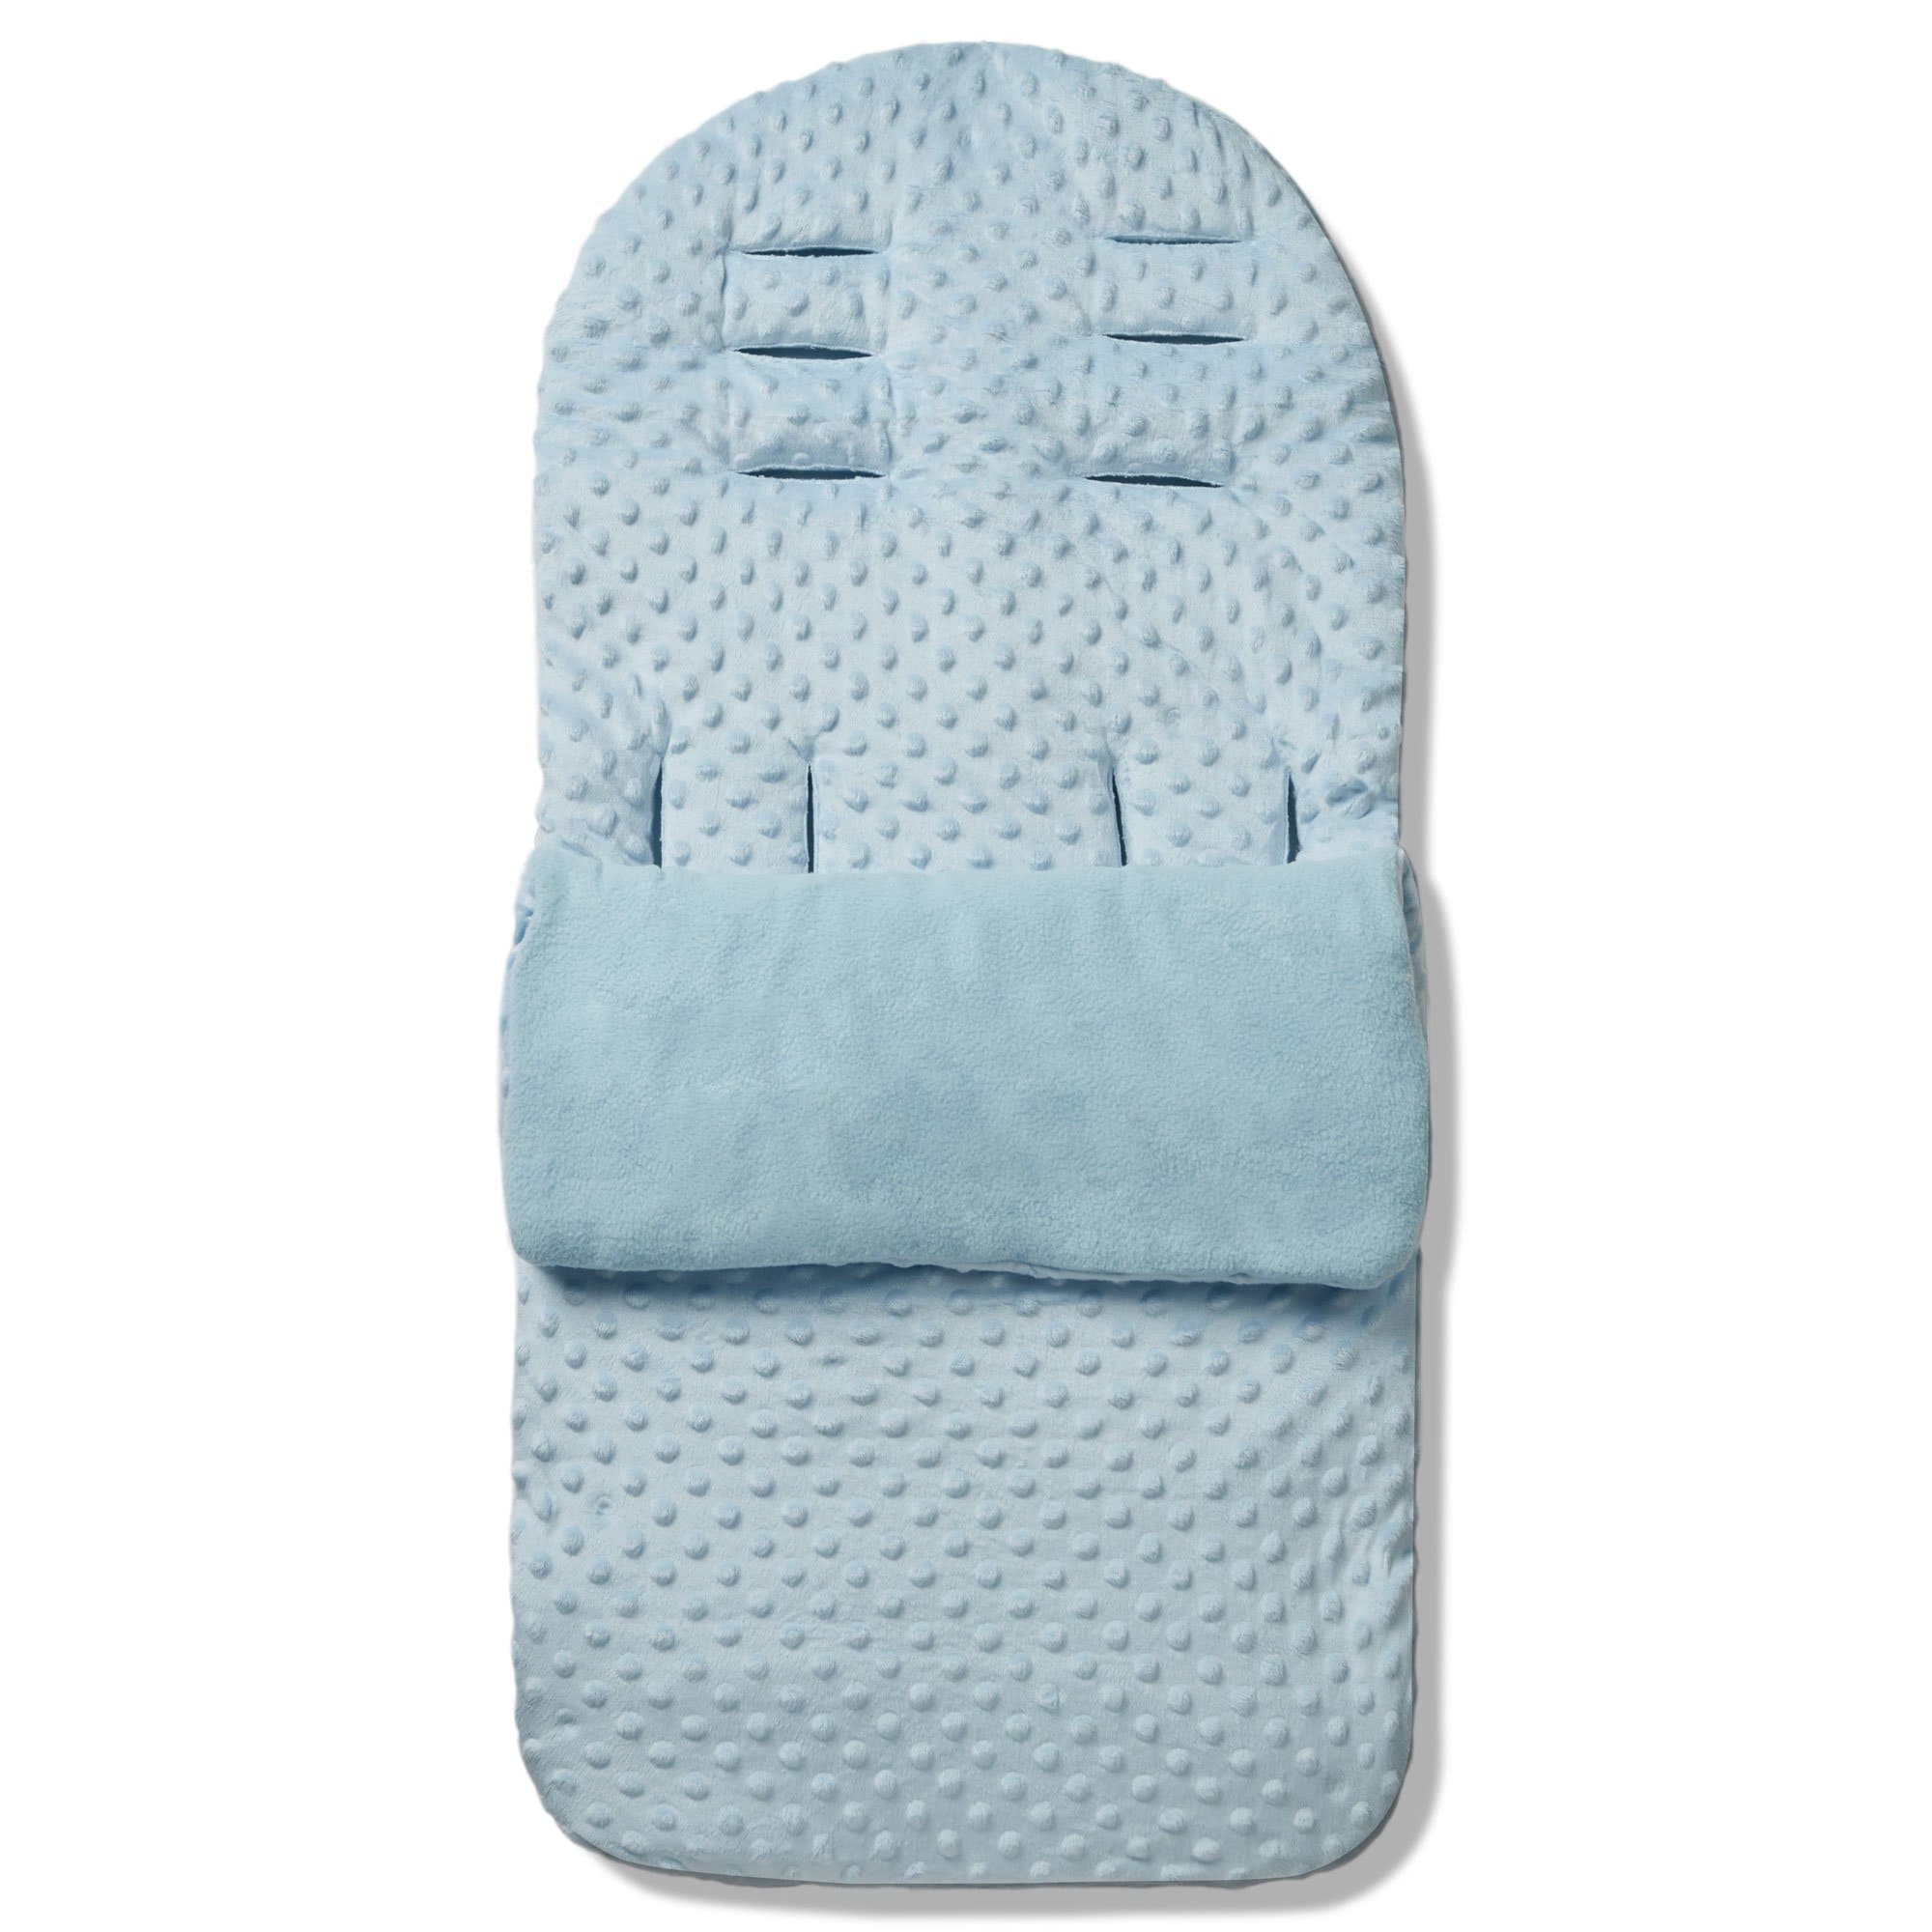 Dimple Footmuff / Cosy Toes Compatible with Baby Weavers - Blue / Fits All Models | For Your Little One